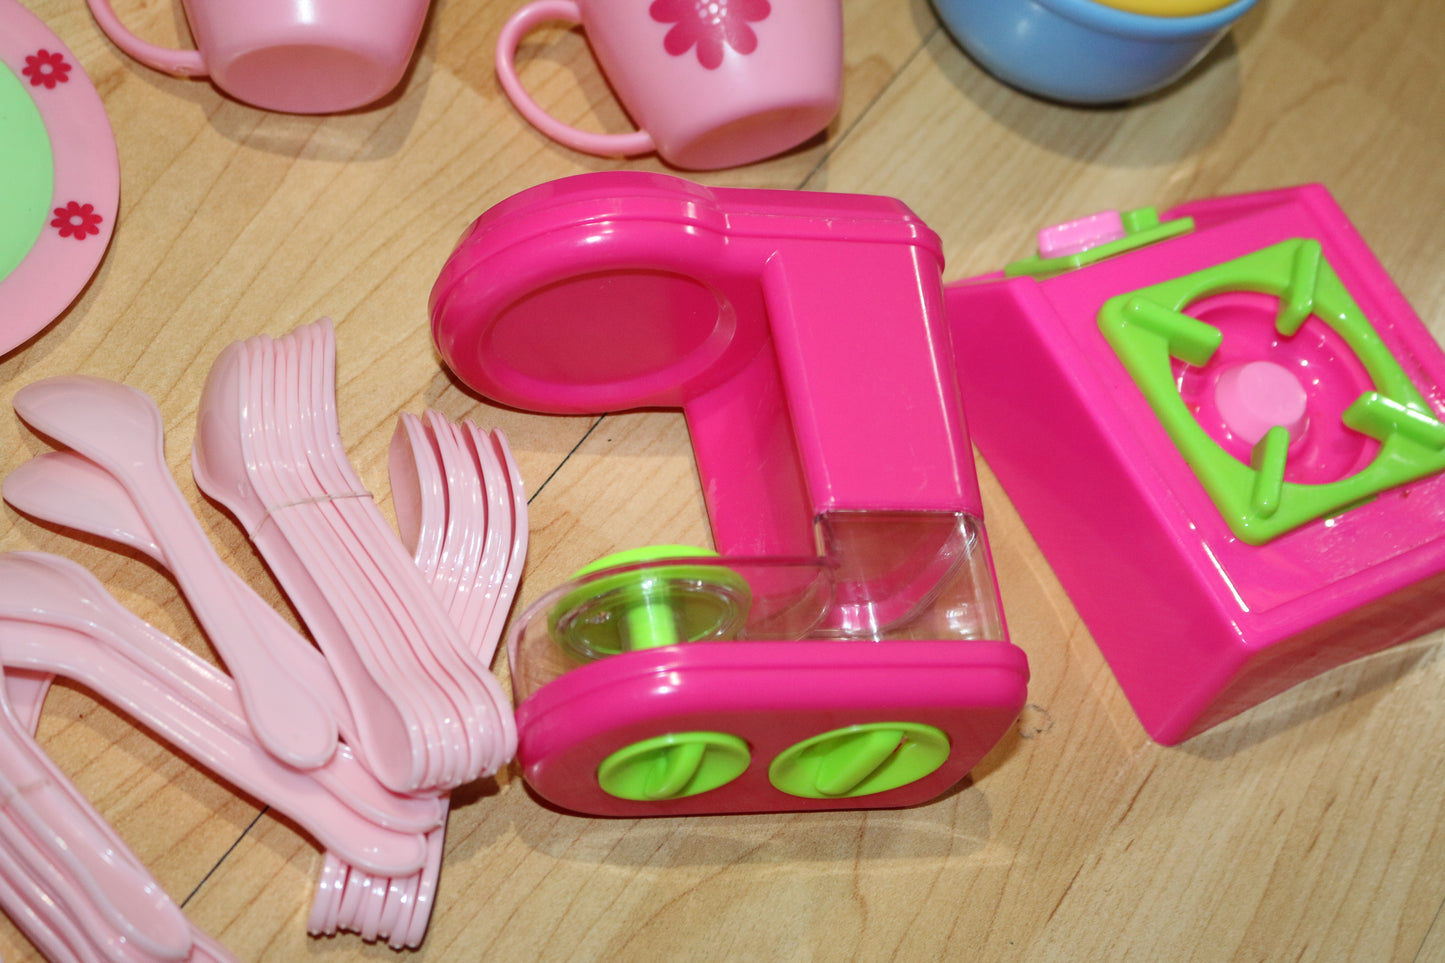 Play kitchen Dishes Mixed Lot Played With Condition coffee heater, spoons toys